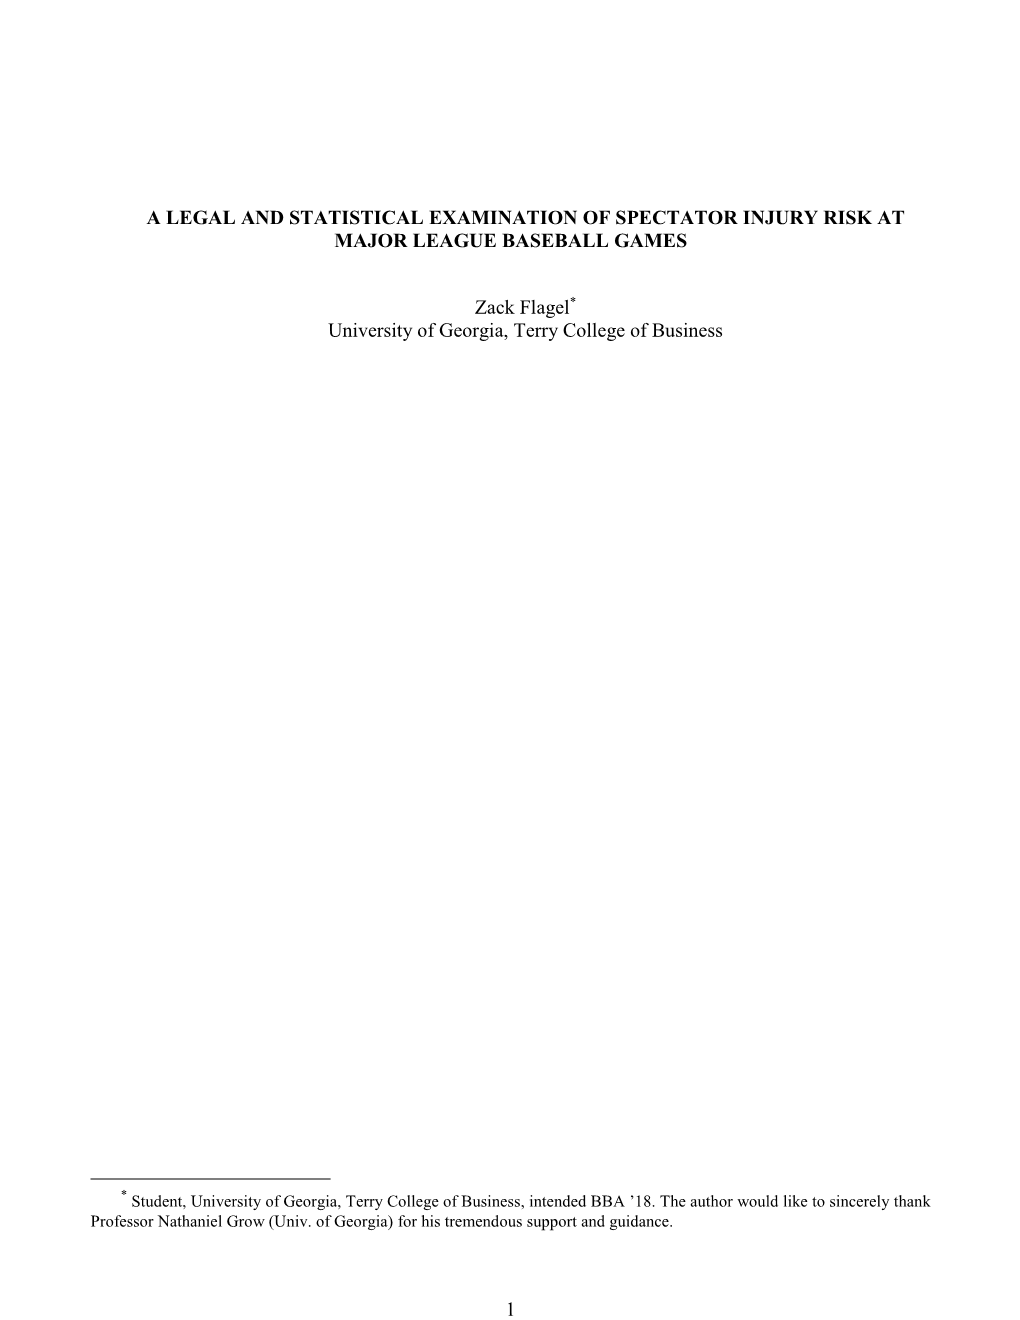 1 a Legal and Statistical Examination of Spectator